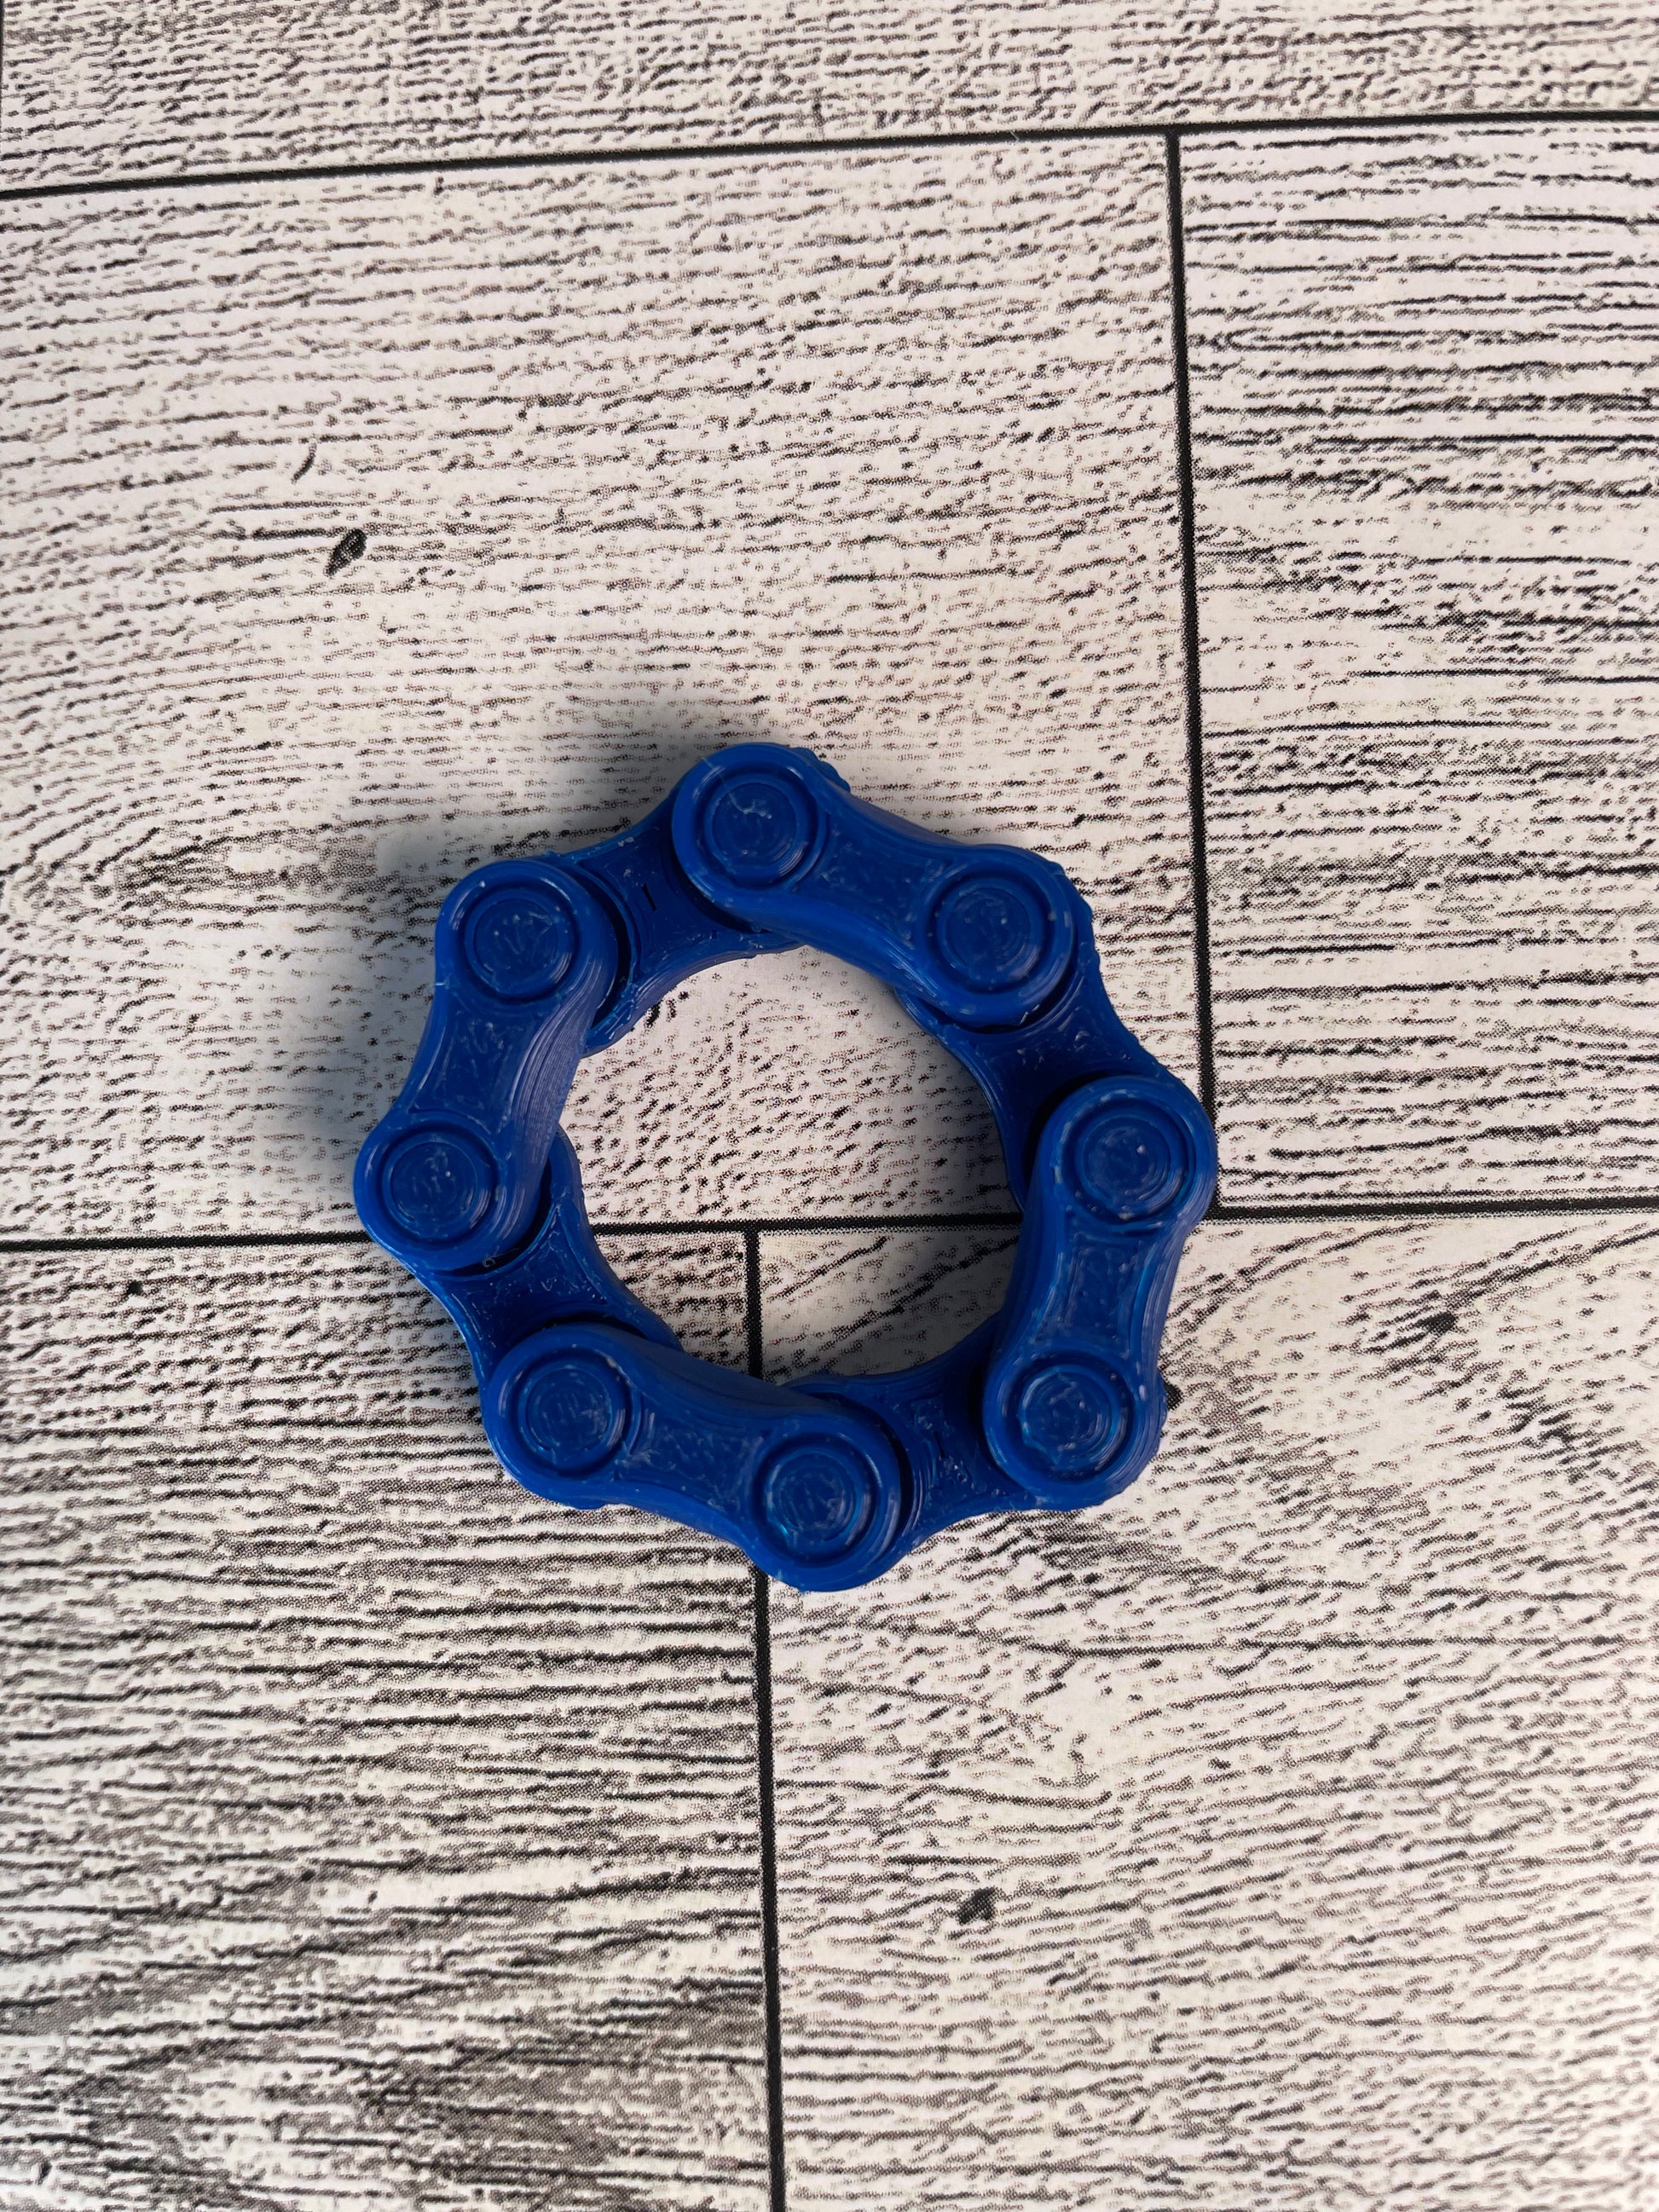 A blue chain link on a wood backdrop. The chain is arranged in a circle shape and there are four links.